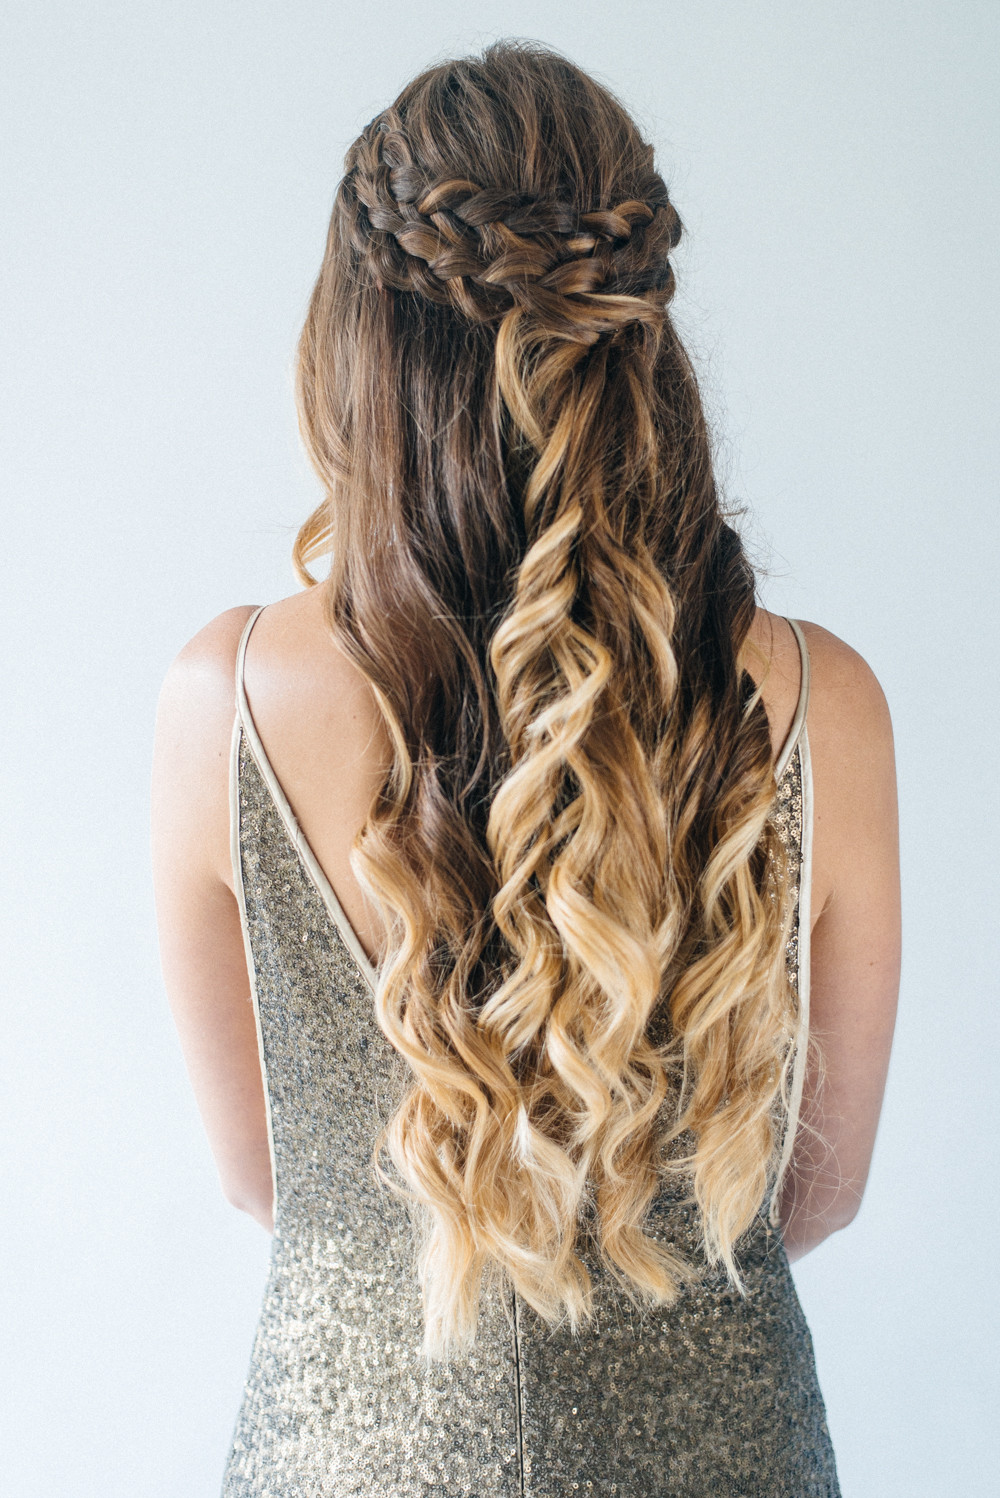 Hair Down Wedding Hairstyles
 Inspiration For Half Up Half Down Wedding Hair With